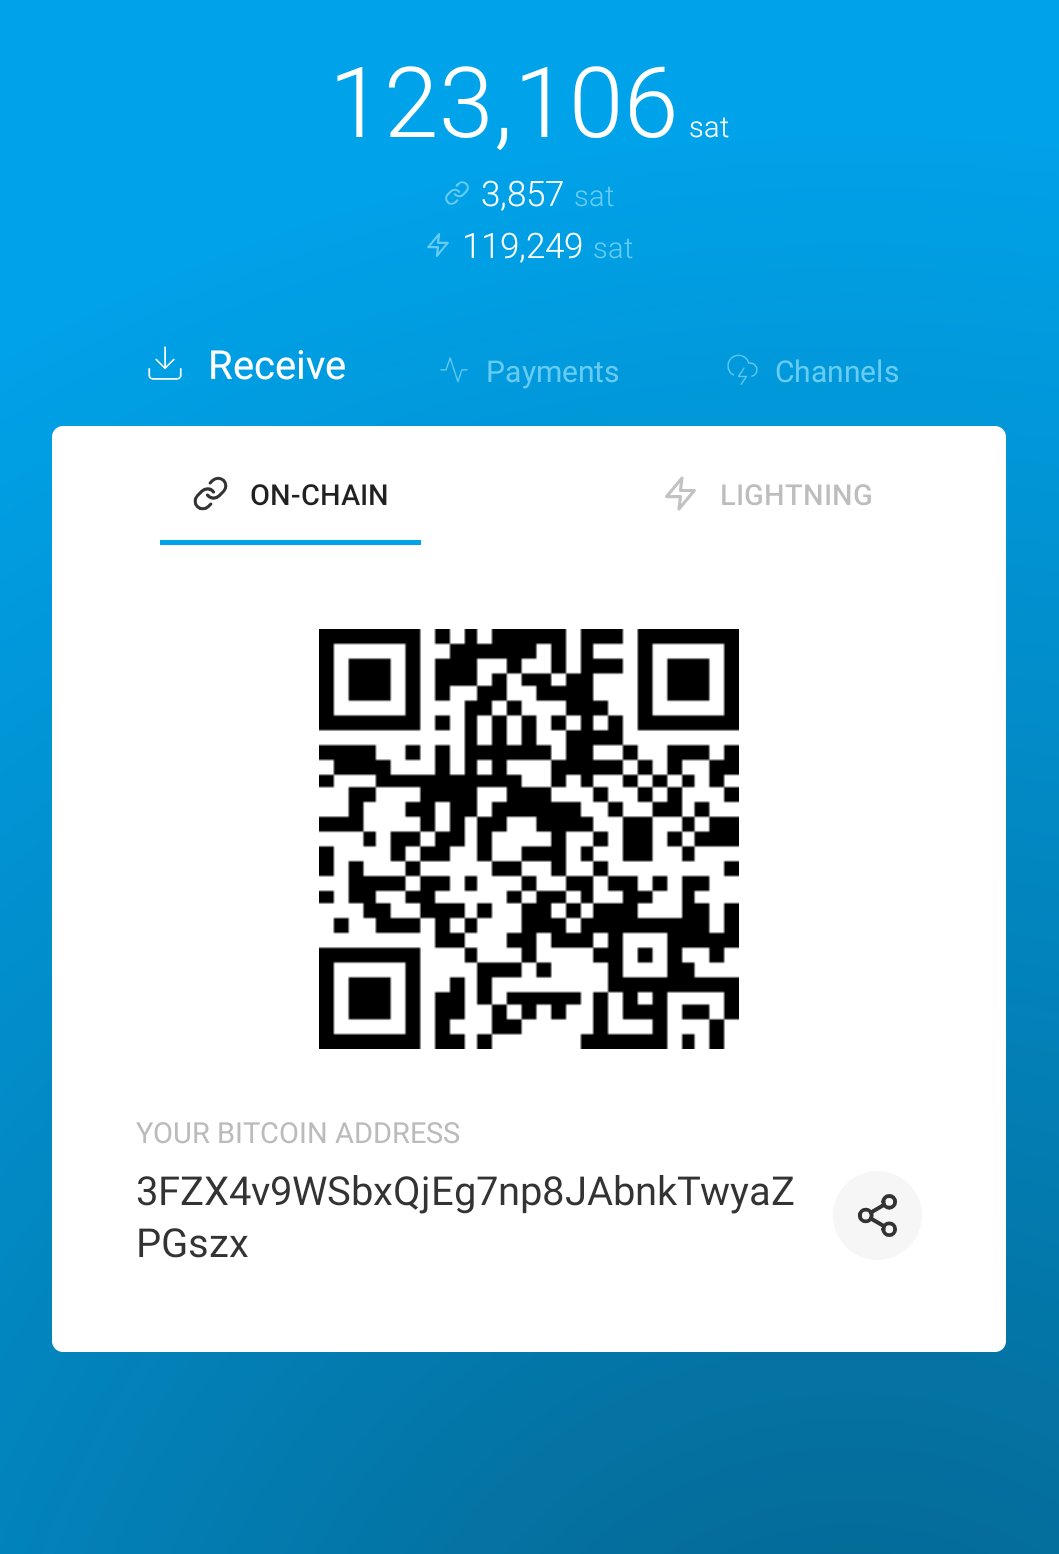 Example of Eclair Lightning Wallet Interface